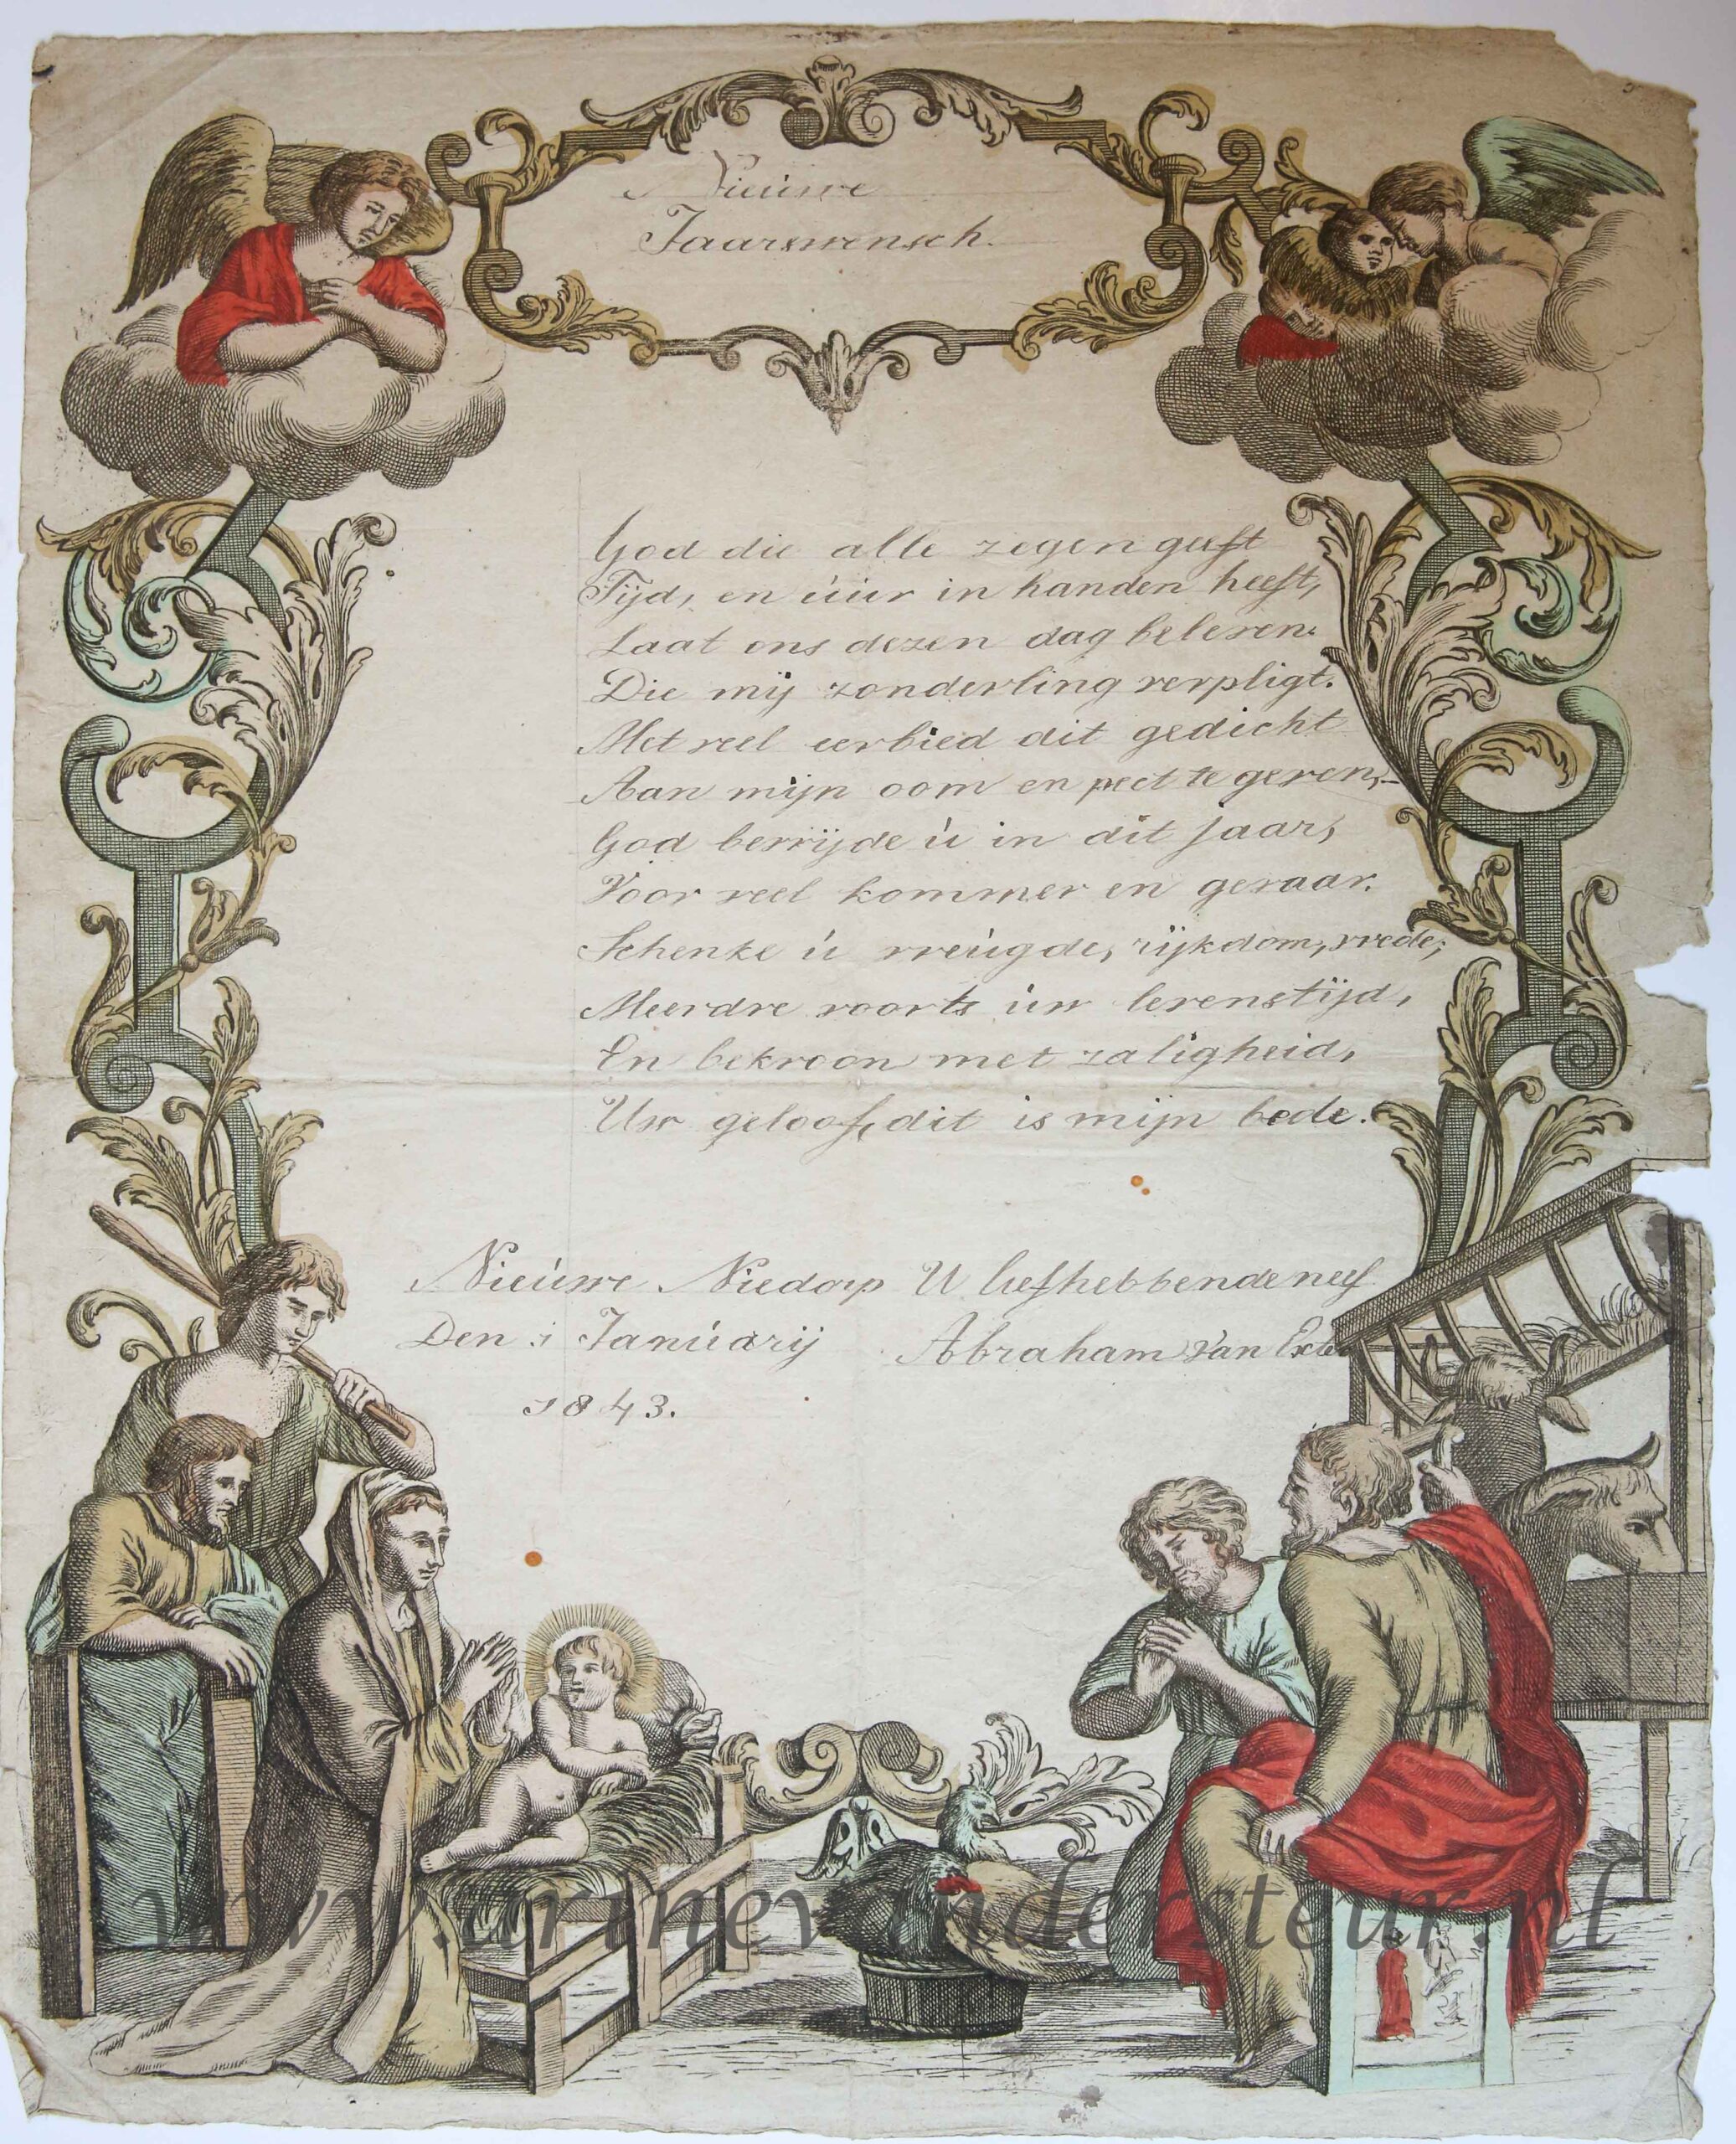 [Nieuwjaarswensch / New Year Wishes, 1843] Abraham van Exter. Hand colored wishcard with the Nativity and adoration of the shepherds, dated 1843, 1 p.